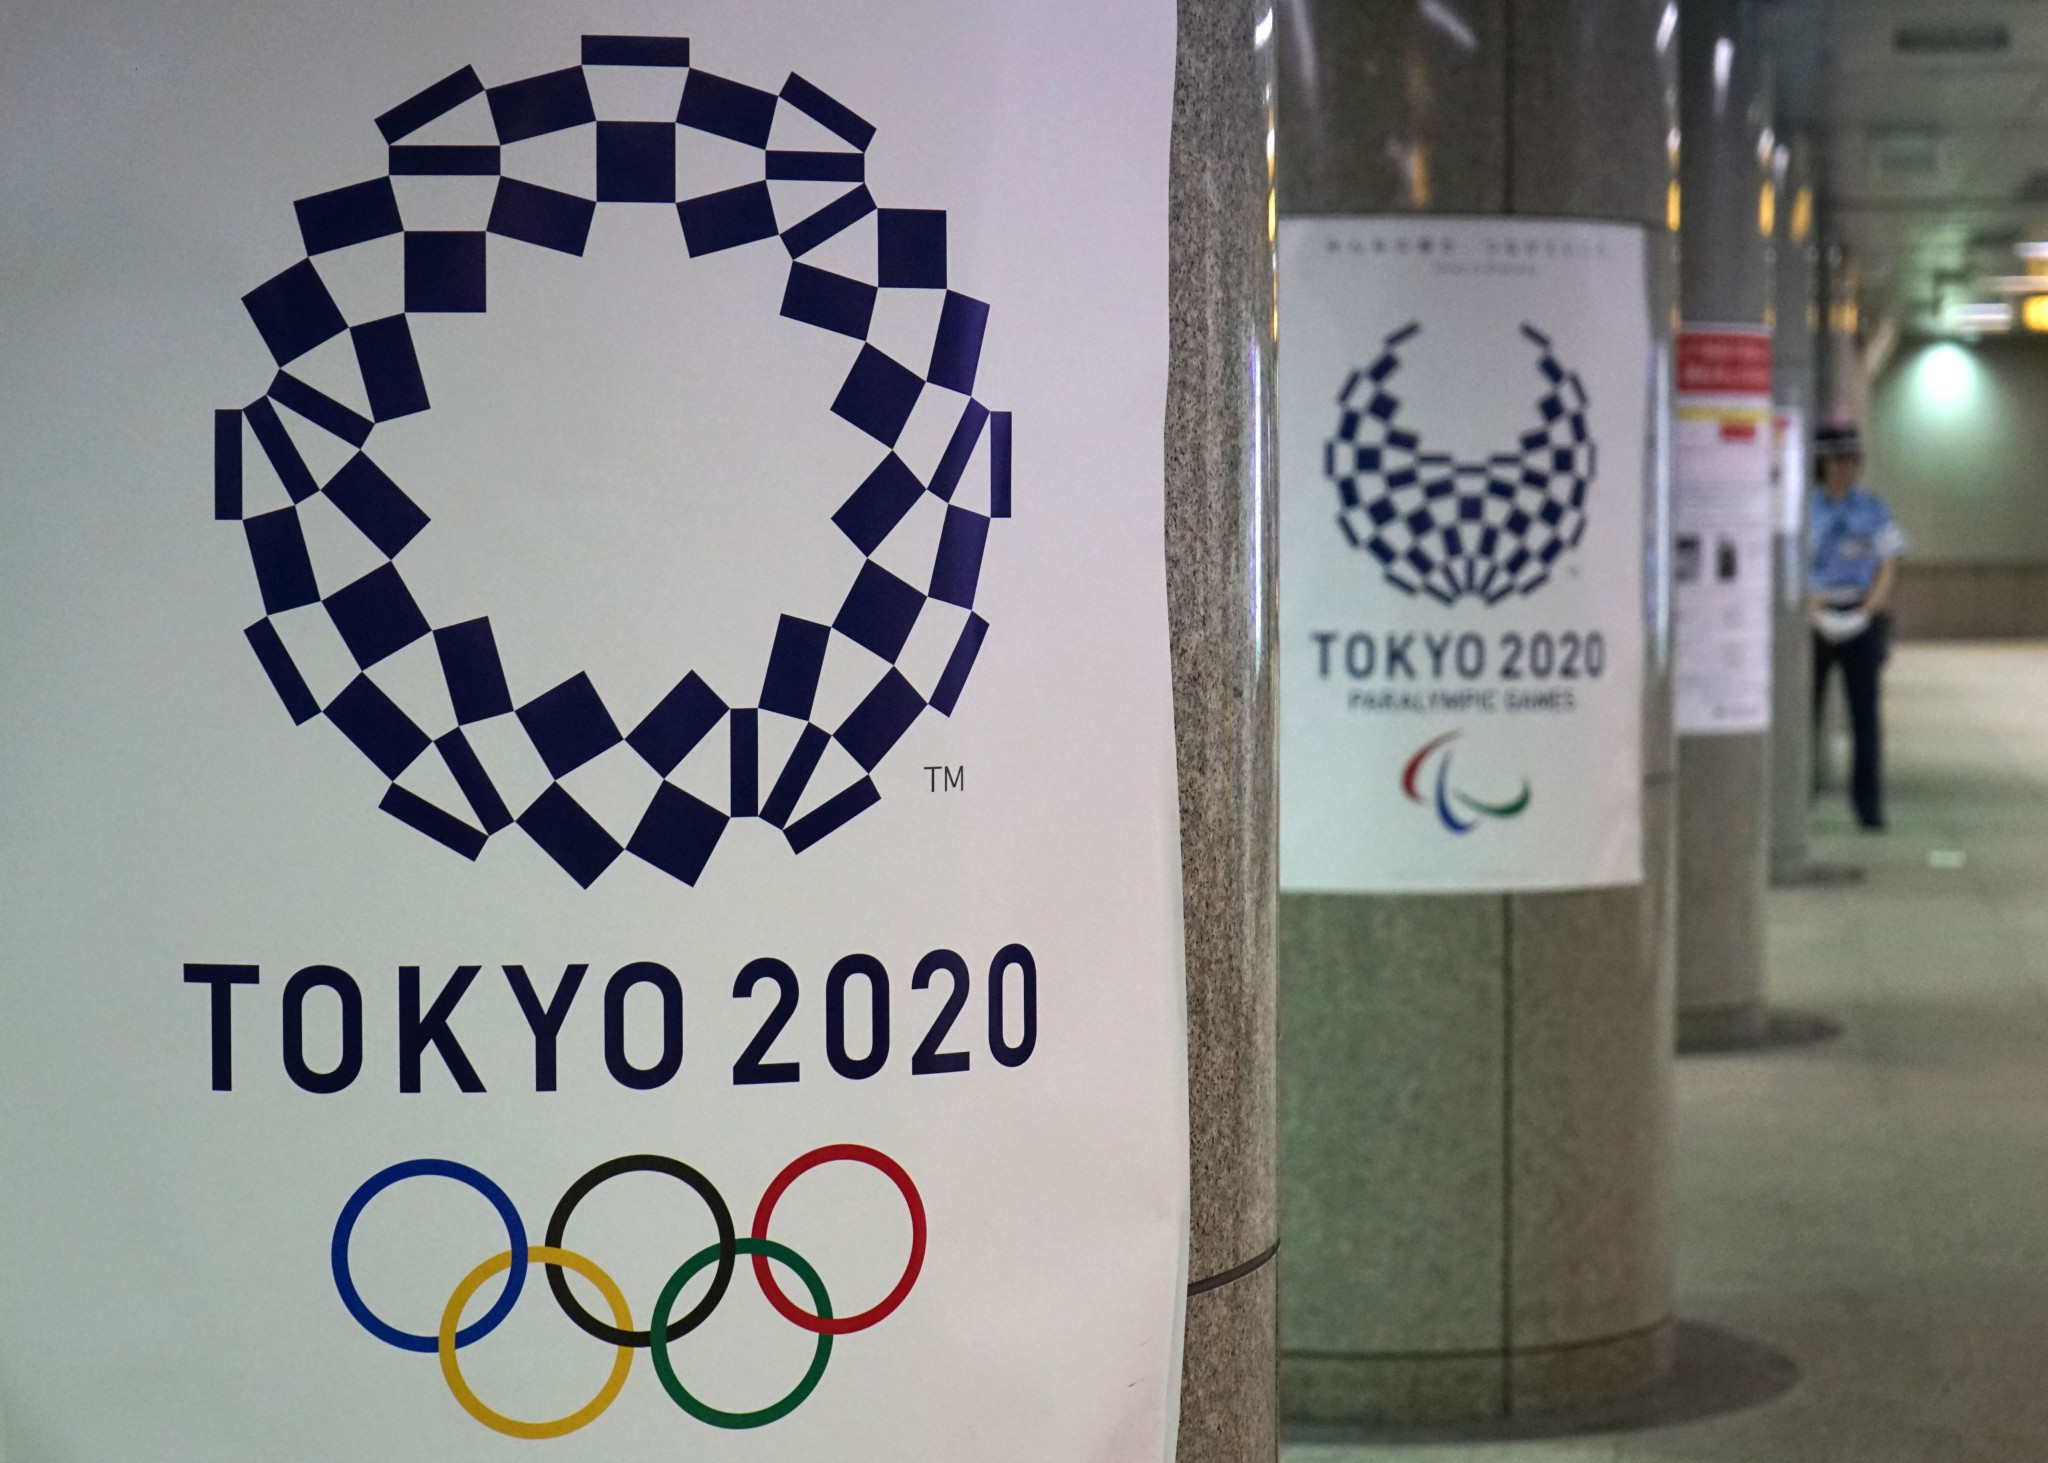 Tokyo 2020 have released the third version of their budget ©Tokyo 2020